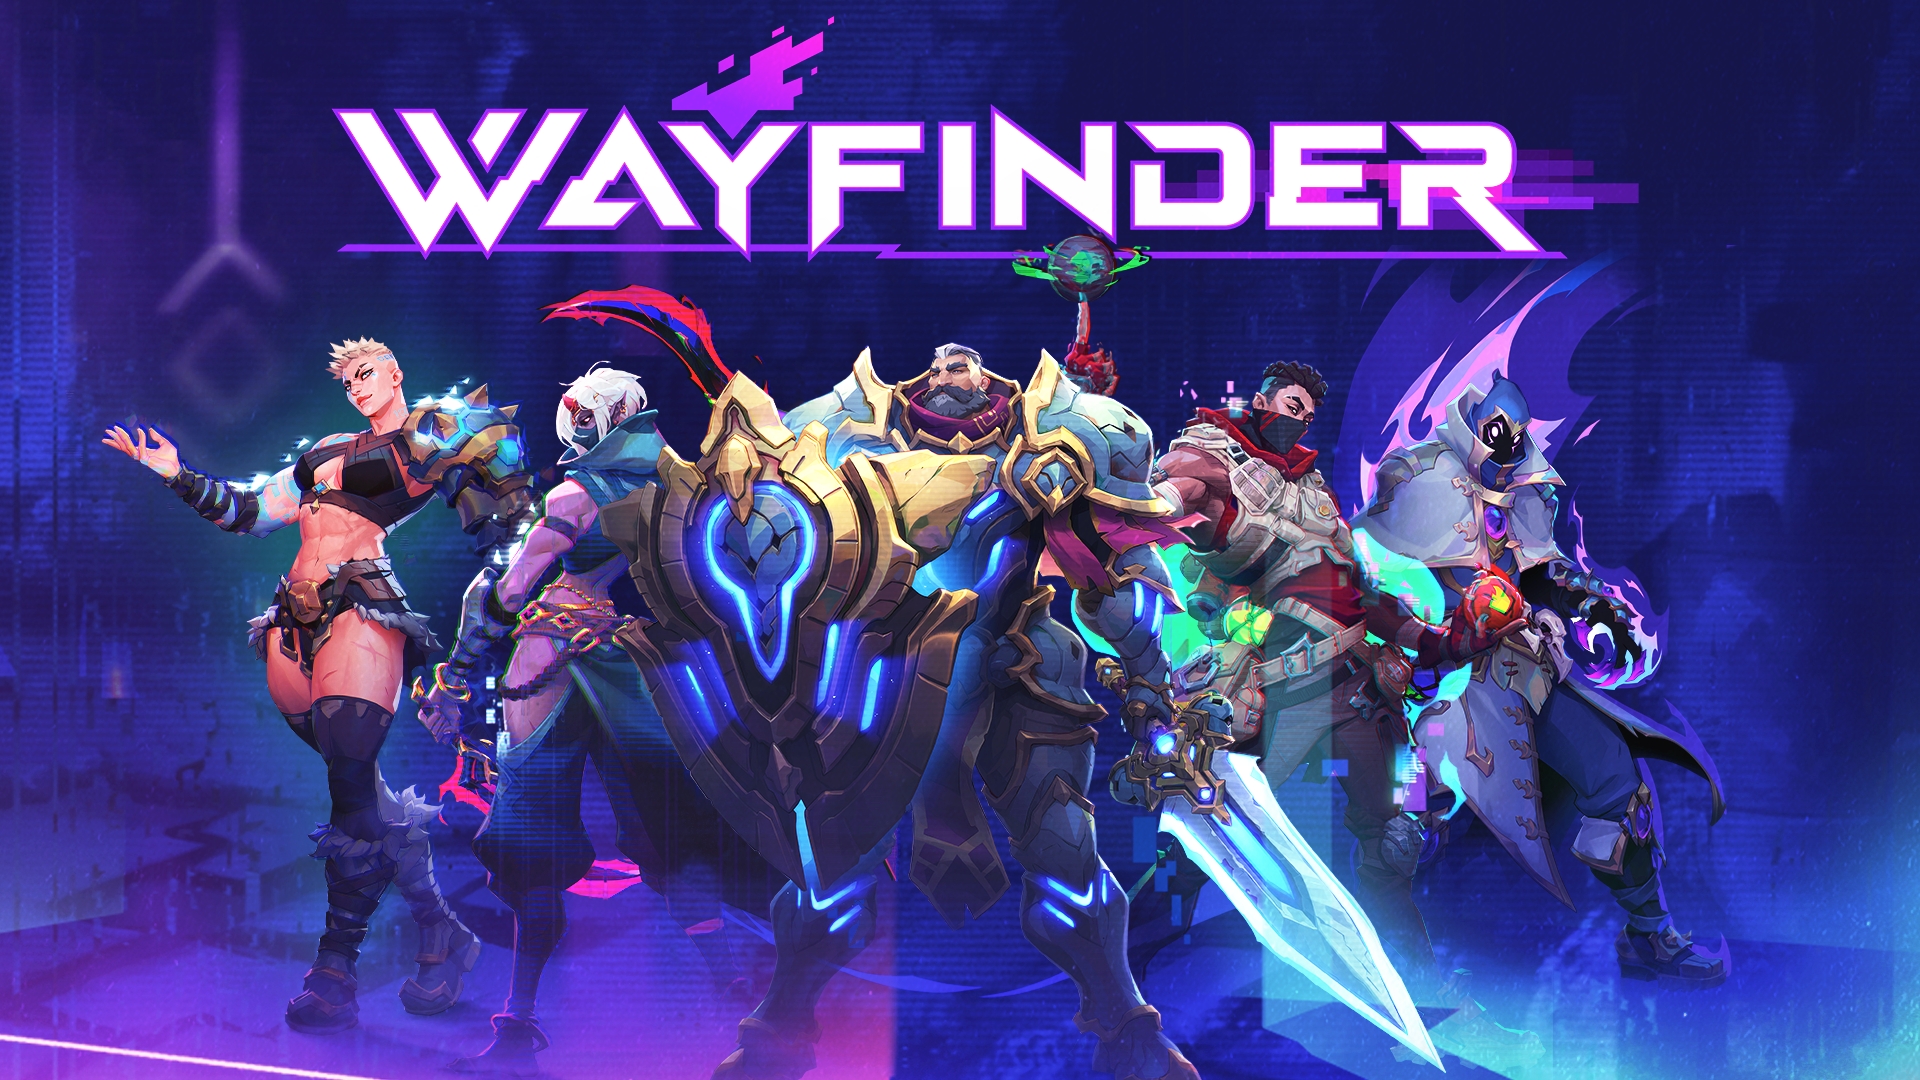 Online Action RPG Wayfinder Announced for PS5, PS4, and PC